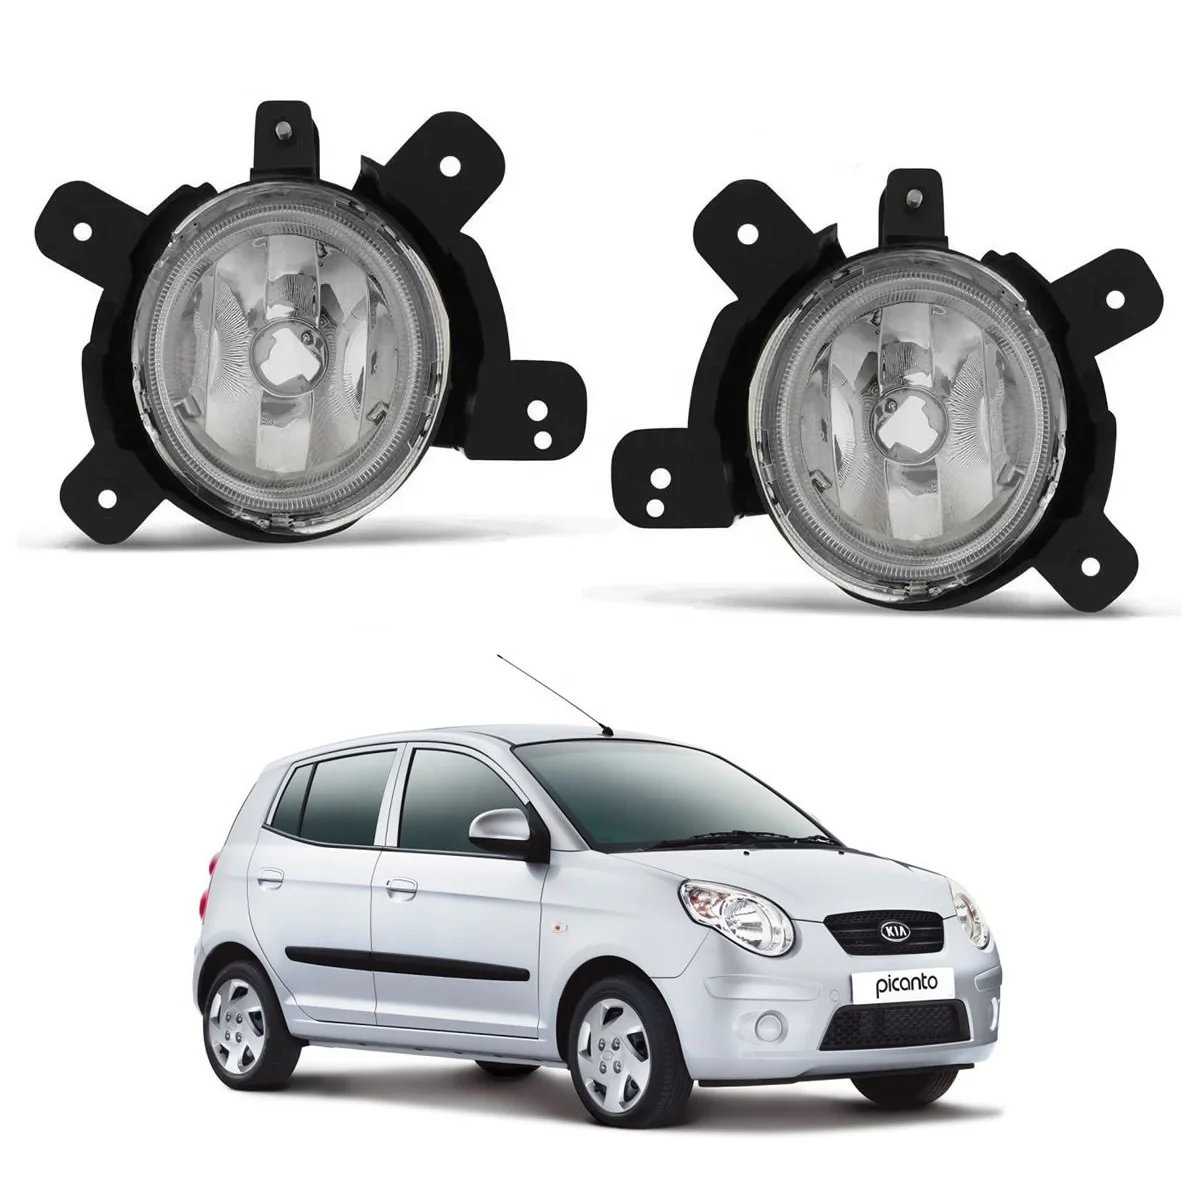 Objector Hviske bypass Wholesale OEM style auto parts body kit halogen Fog Light Driving Lamp For kia  picanto morning 2007 2008 2009 From m.alibaba.com